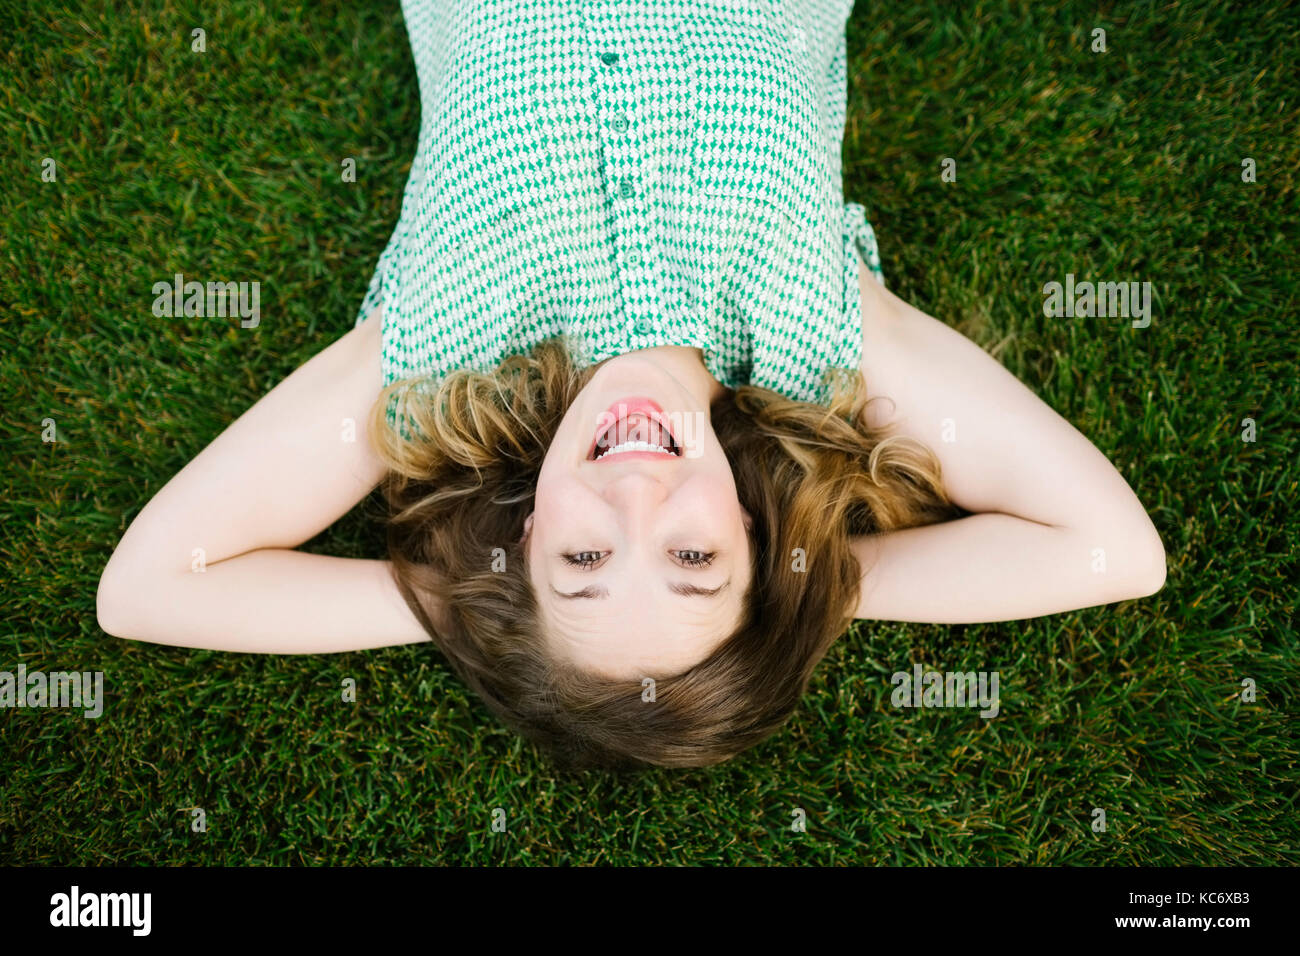 Portrait of woman lying on grass and laughing Stock Photo